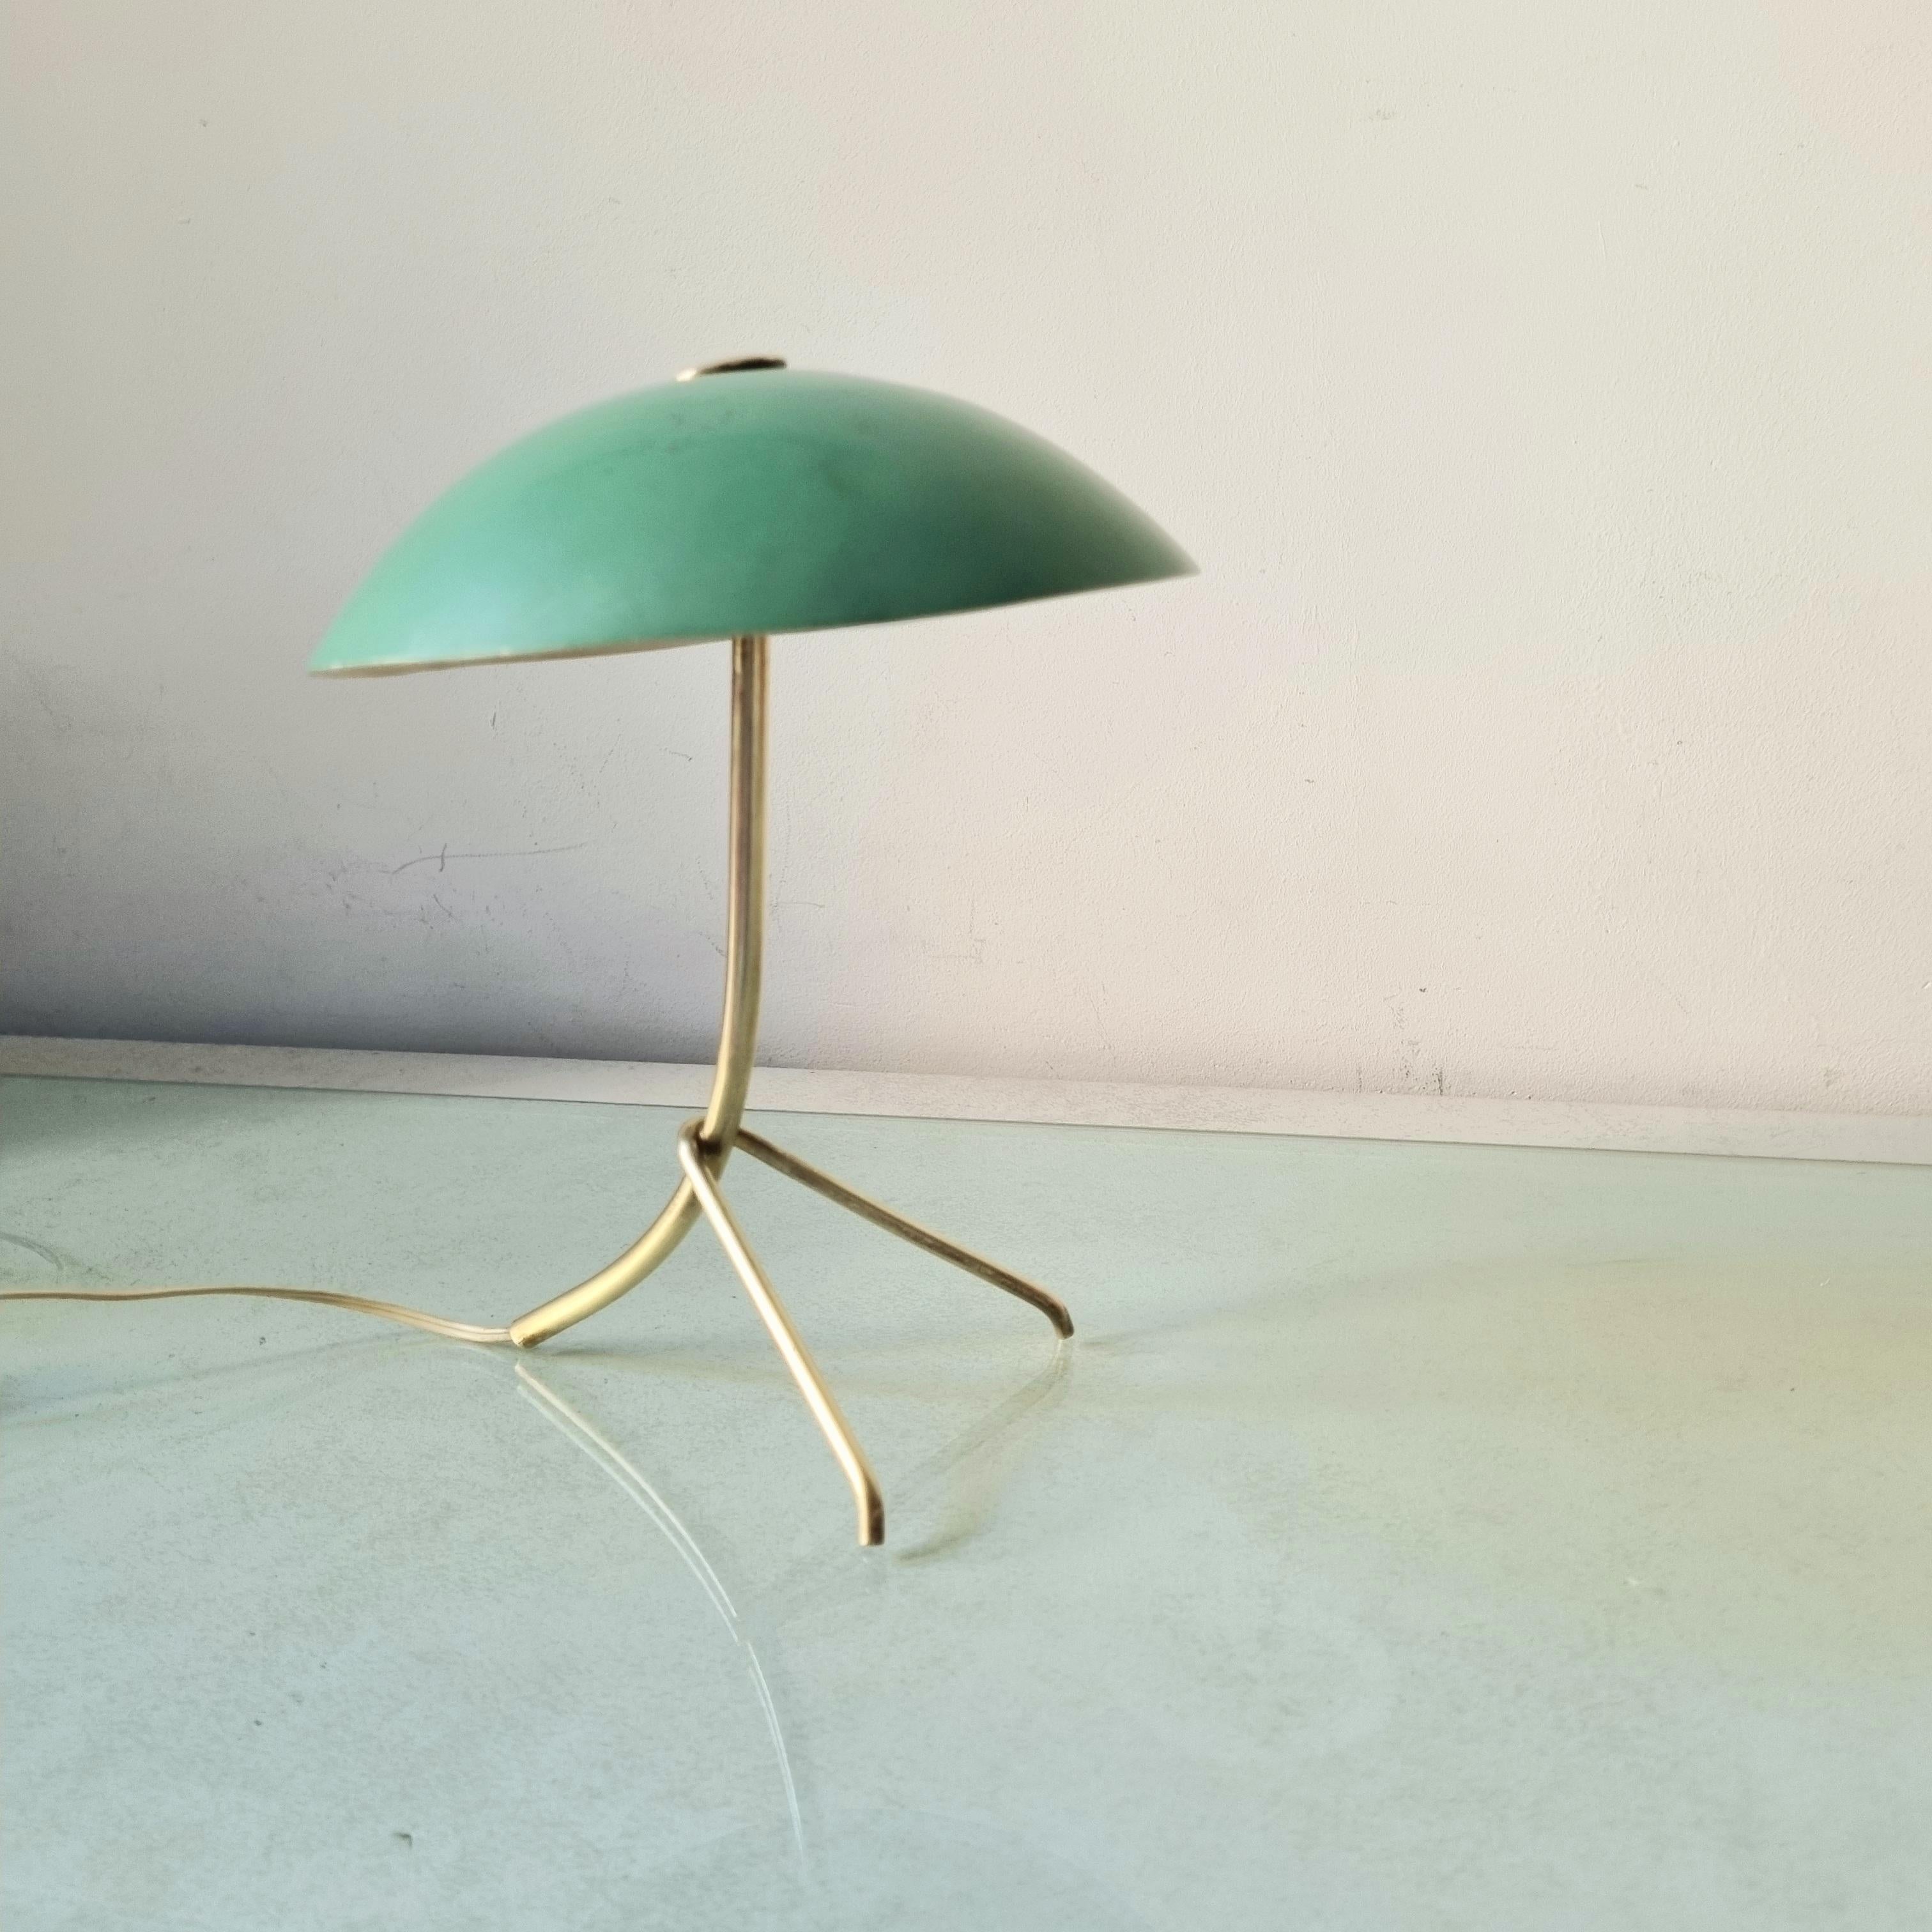 Beautiful small table lamp by Stilux Milano from the 1950s. It still has its original label by Stilux Milano on the inside of the shade.
Executed in brass, it has an adjustable aluminum diffuser in green. Provides plenty of personality and charm,